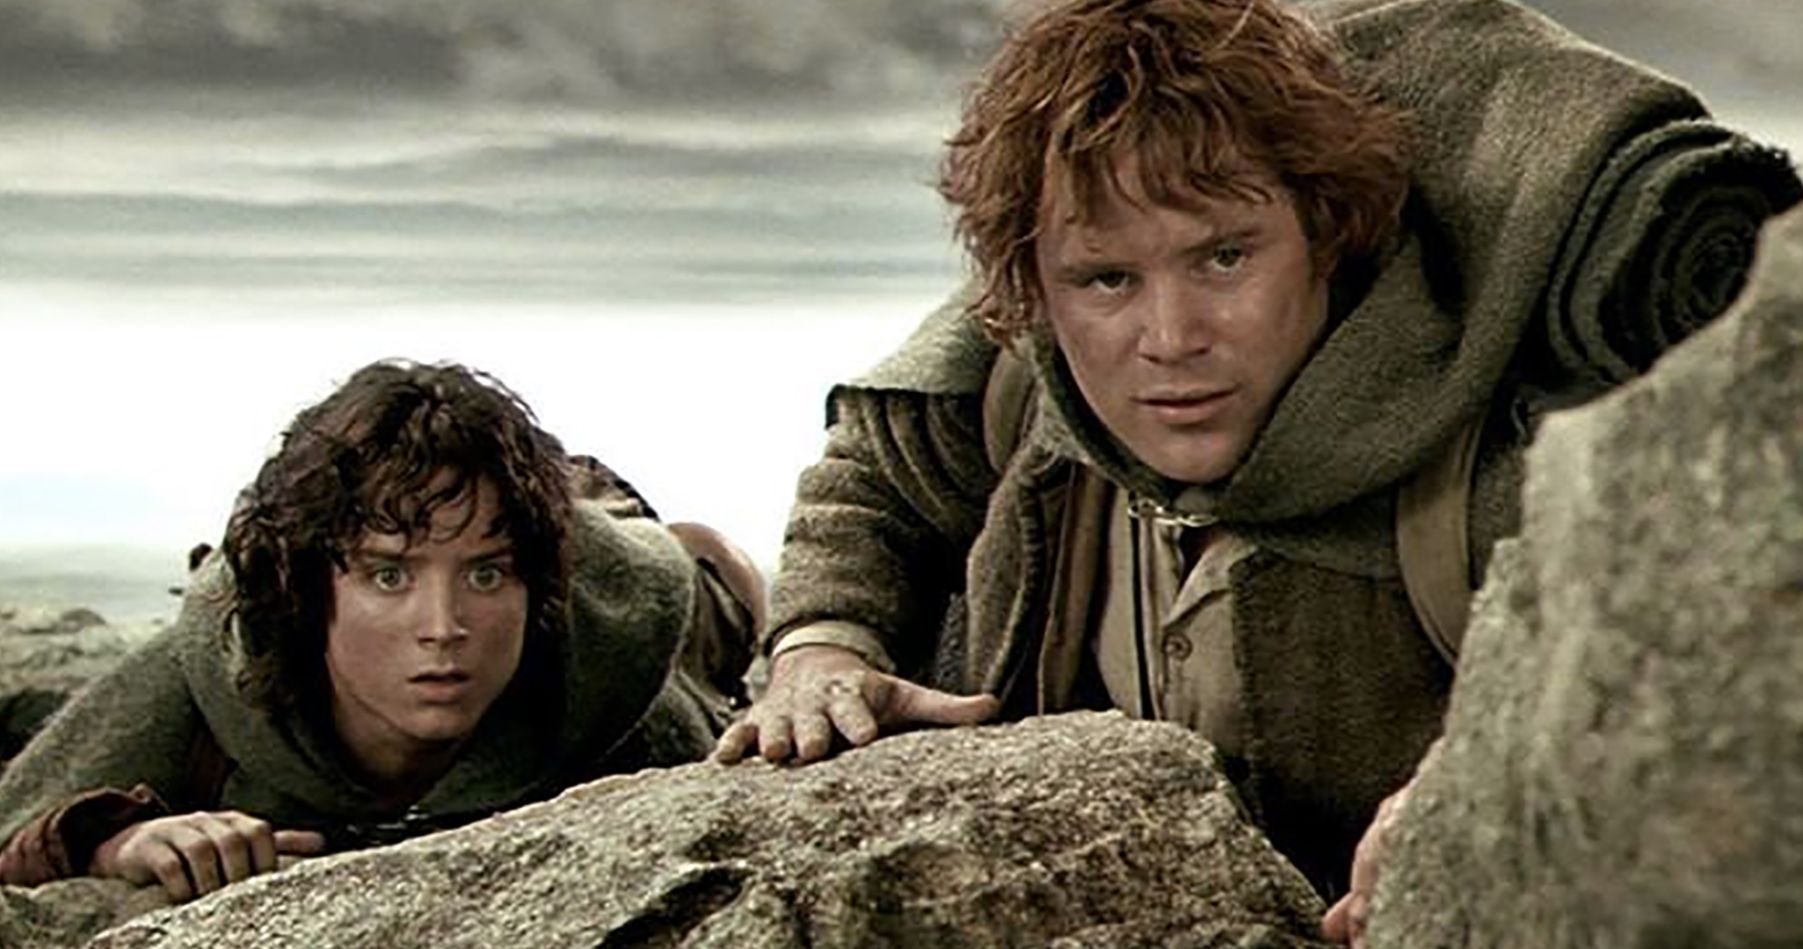 Lord of the Rings TV Show Brings in Jurassic World: Fallen Kingdom Director